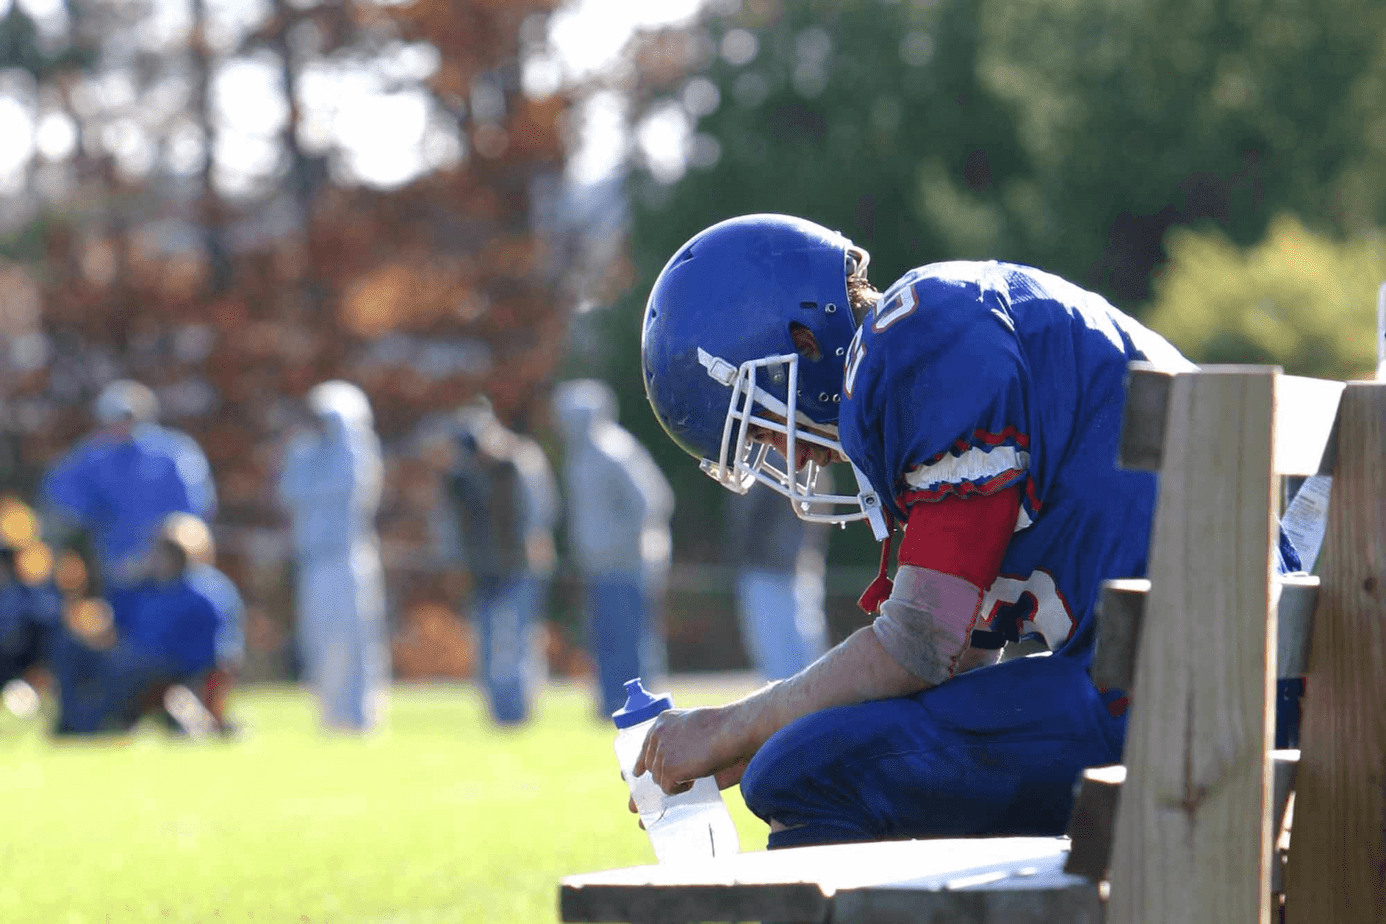 football player on bench holding a water bottle looking sad while team plays on field